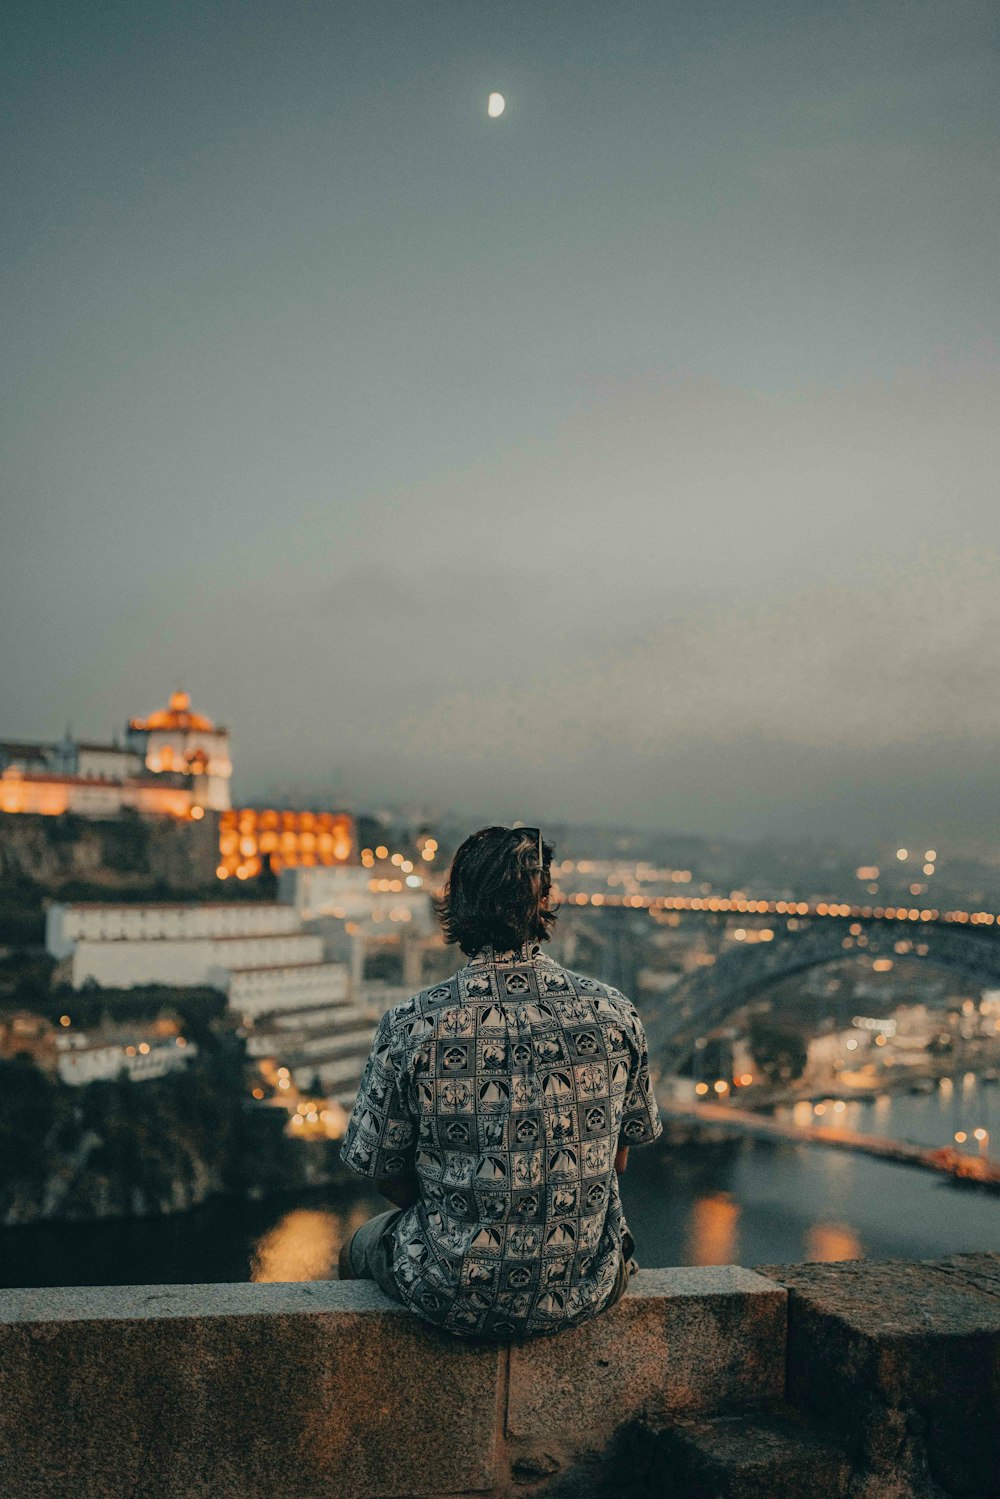 a person sitting on a ledge looking at a city